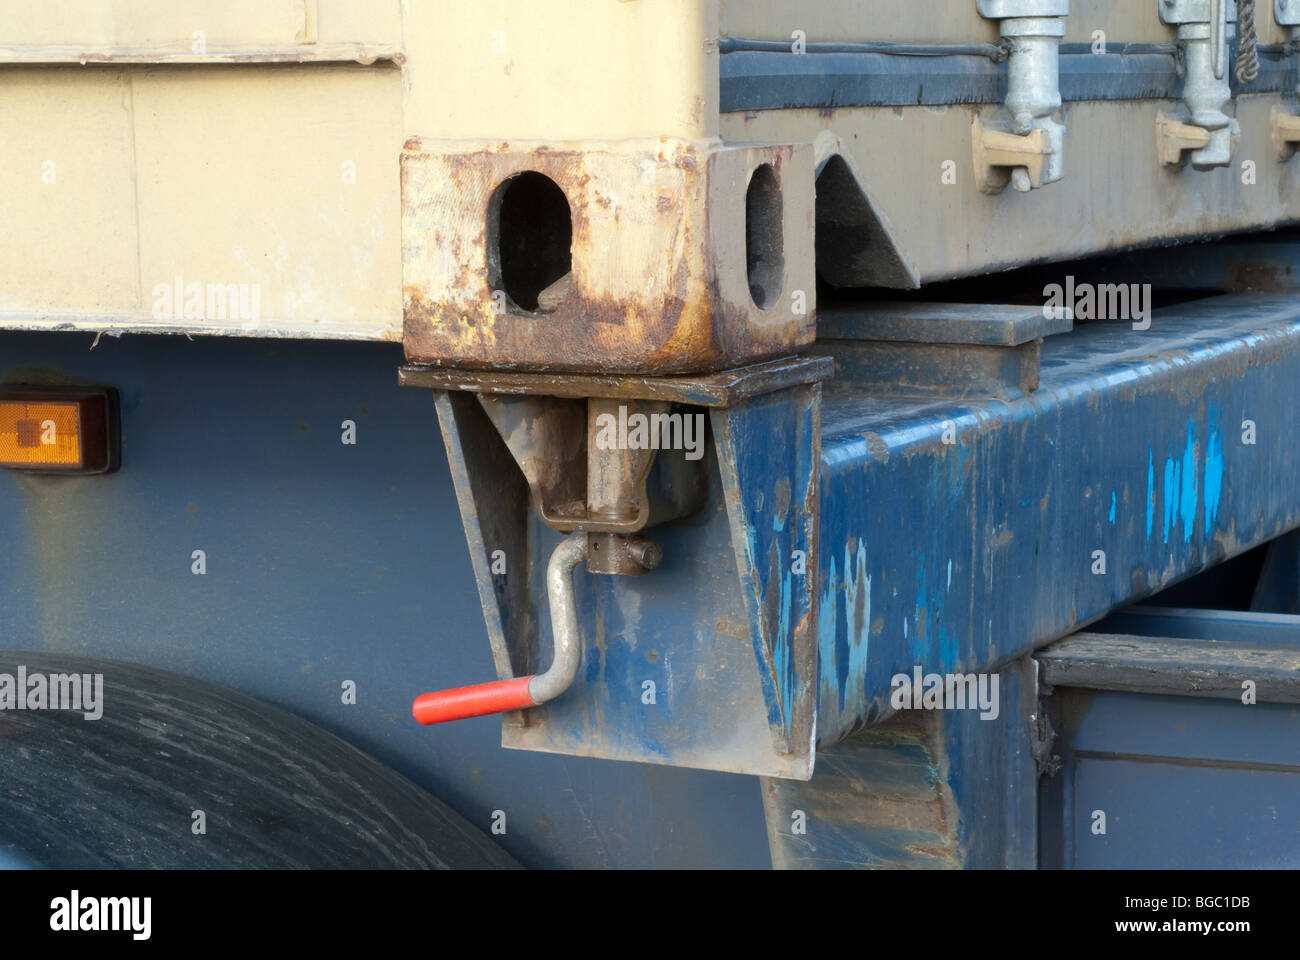 Shipping container Twistlock connection on HGV in locked position with container attached Stock Photo